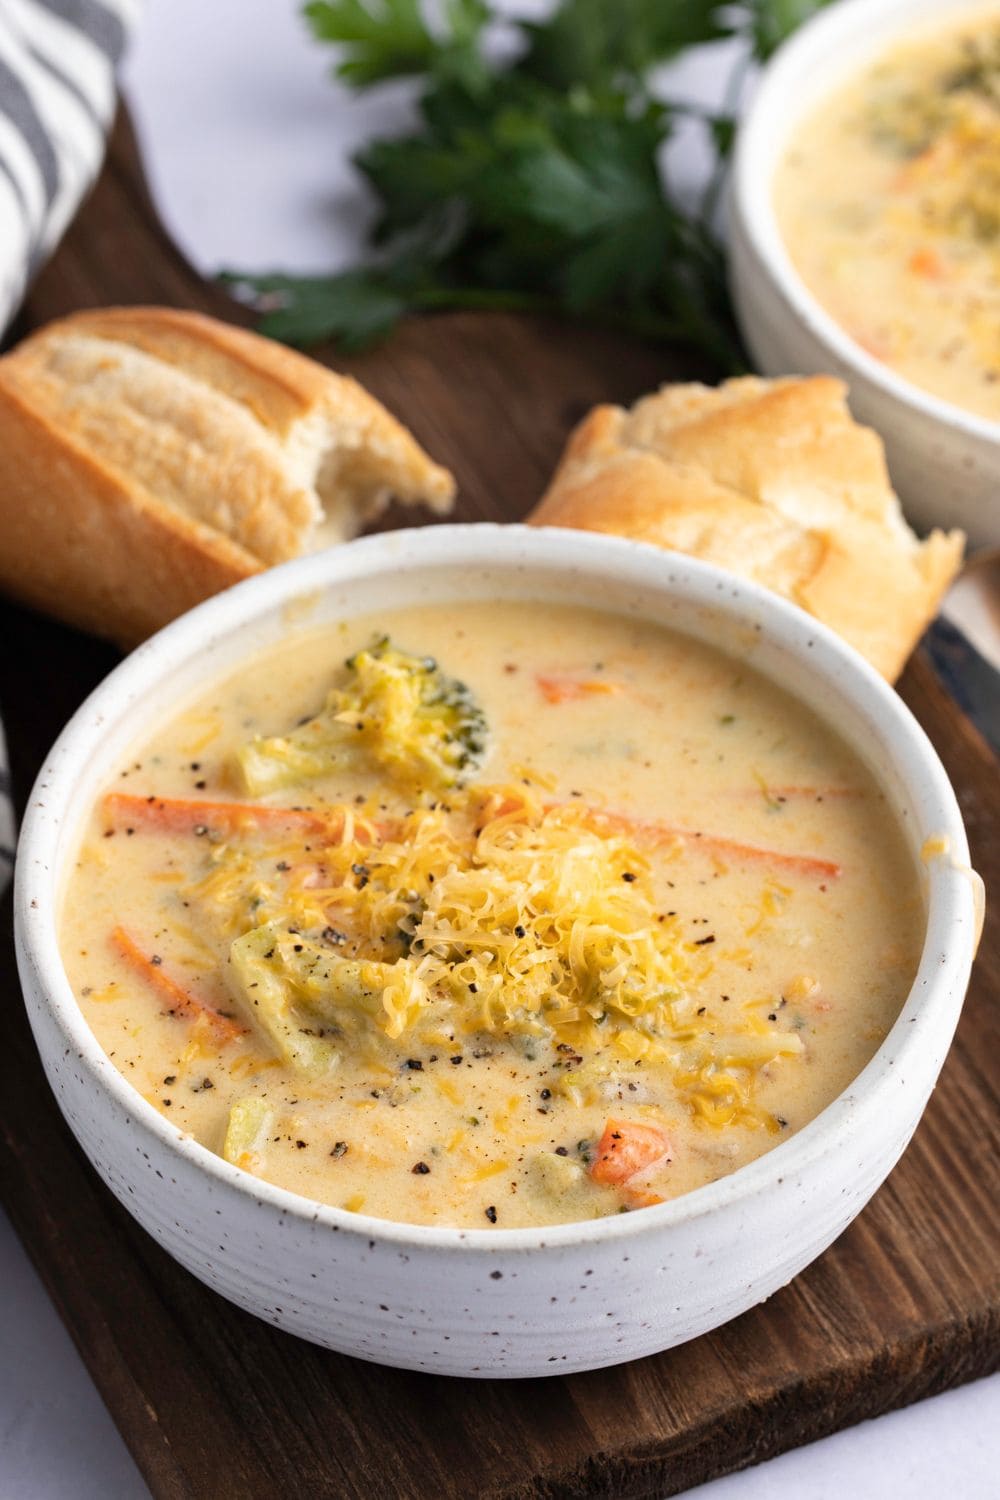 Homemade Panera Broccoli Cheddar Soup with Bread